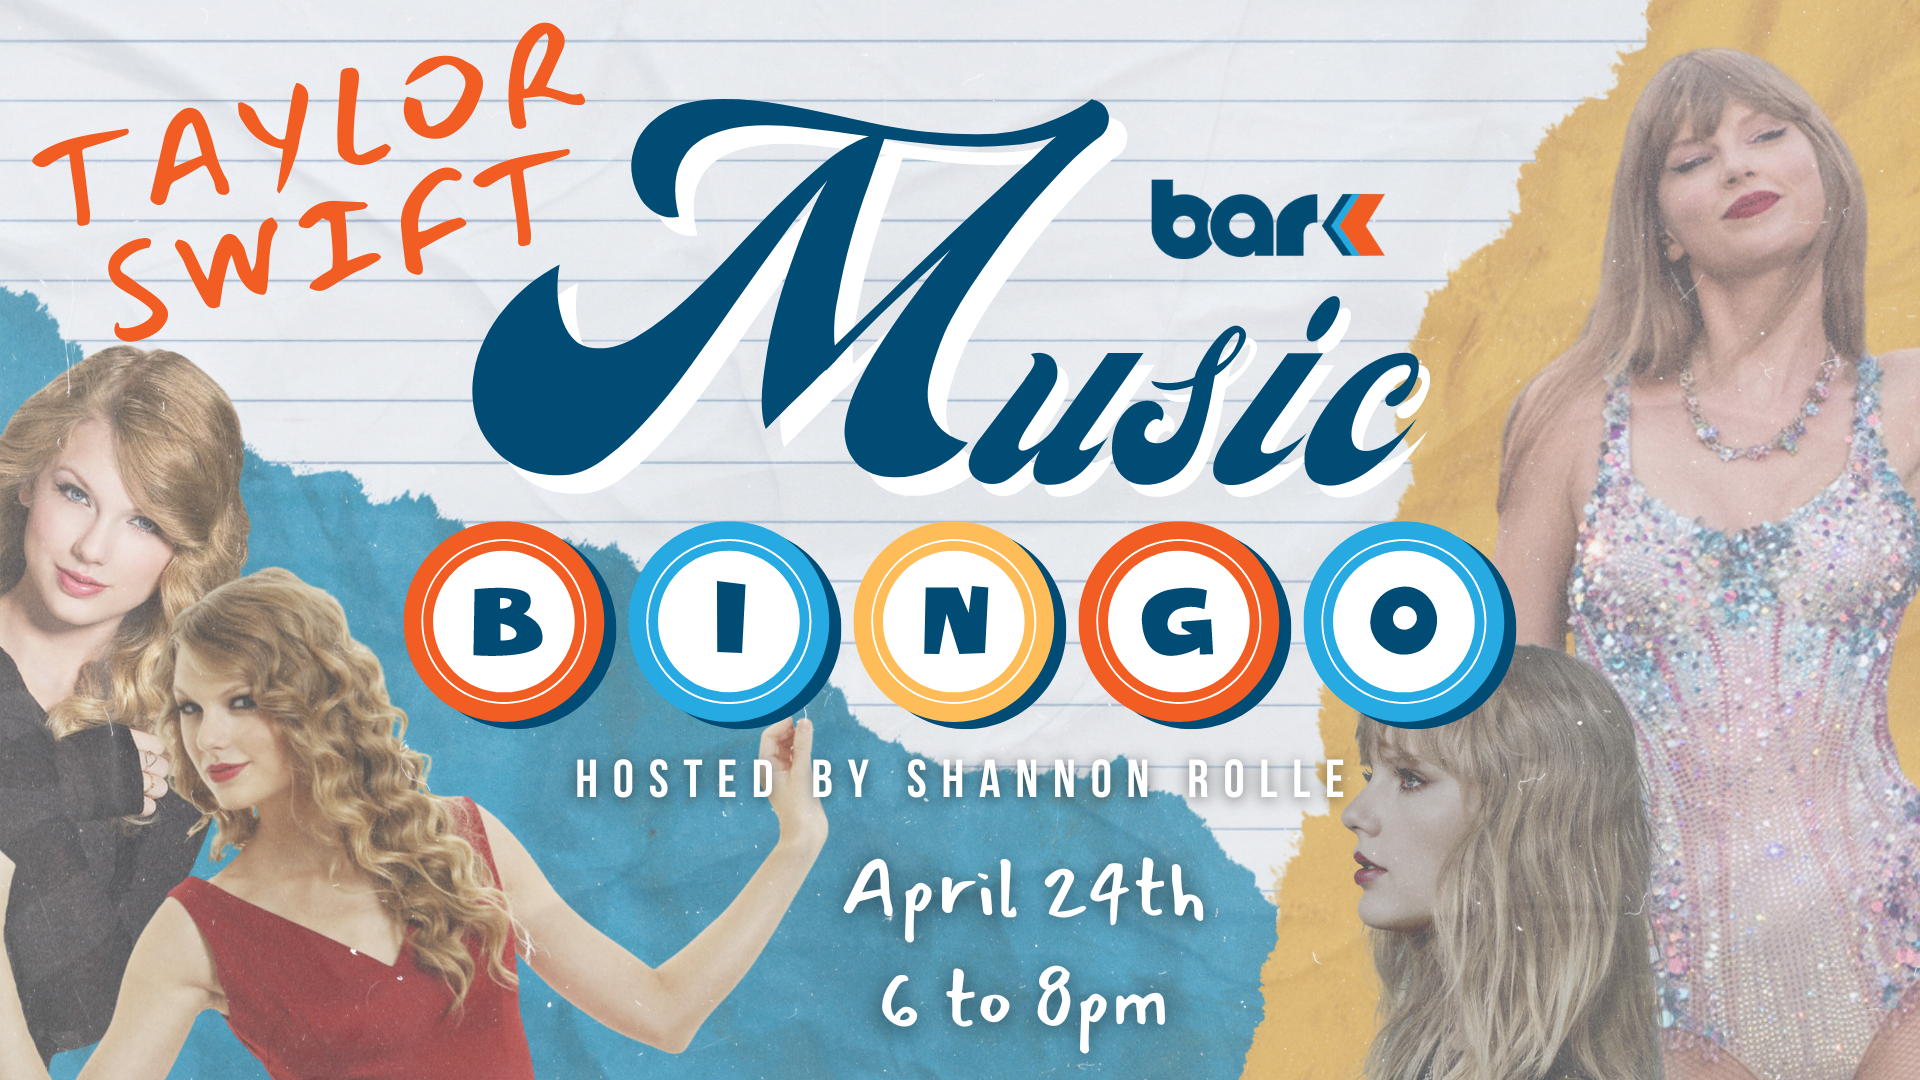 Taylor Swift music bingo at bar k. Hosted by Shannon Rolle on April 24th from 6 to 8 pm.